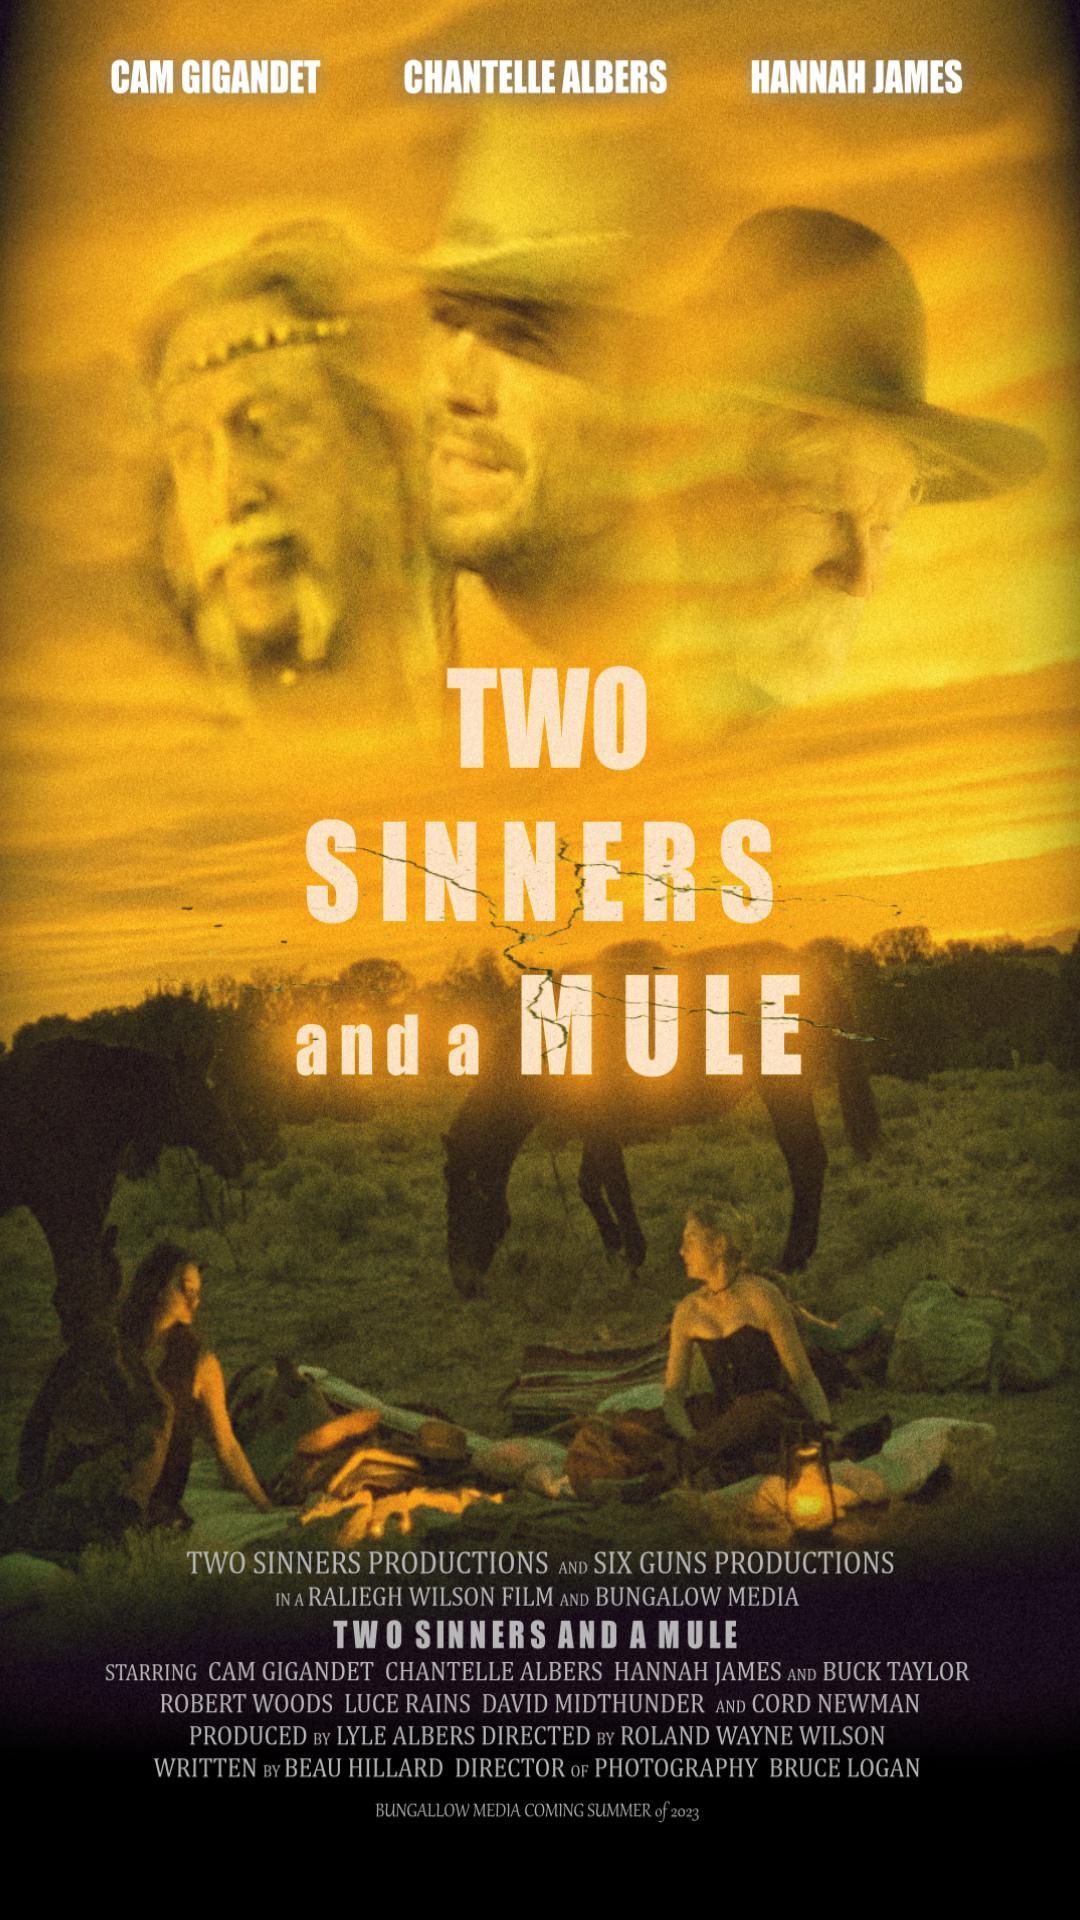 Постер фильма Две грешницы и мул | Two Sinners and a Mule